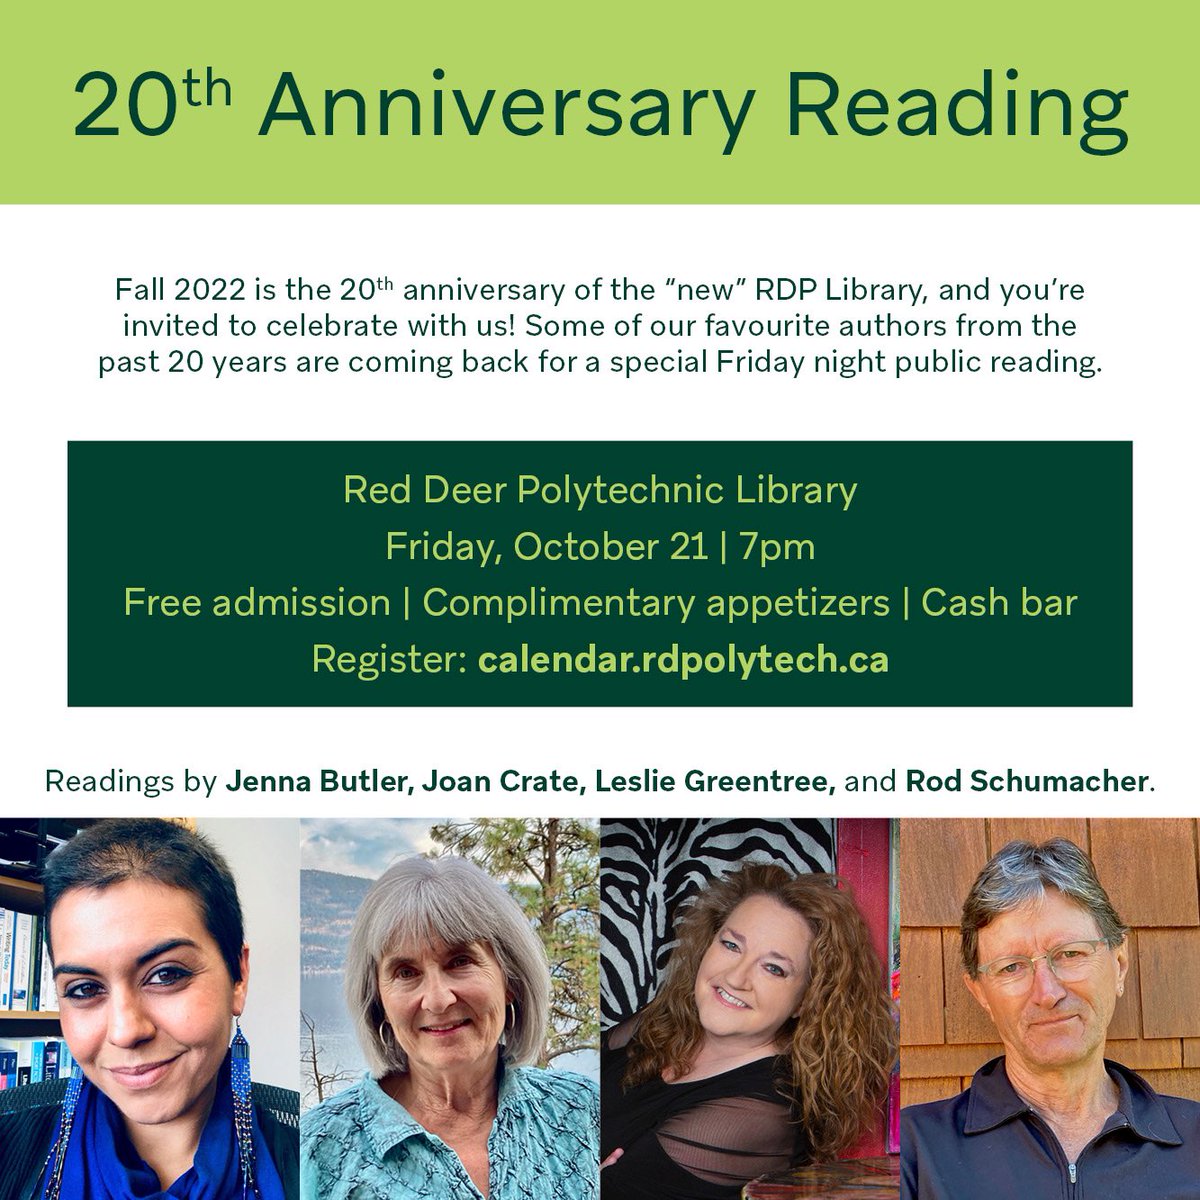 Did I tell y’all I’m reading in Red Deer this Friday night @RedDeerPolytech library? Reuniting with my good friends Jenna Butler, Joan Crate and Rod Schumacher, back where it all started. Please join us! Free admission, cash bar. bit.ly/3VEkPlt